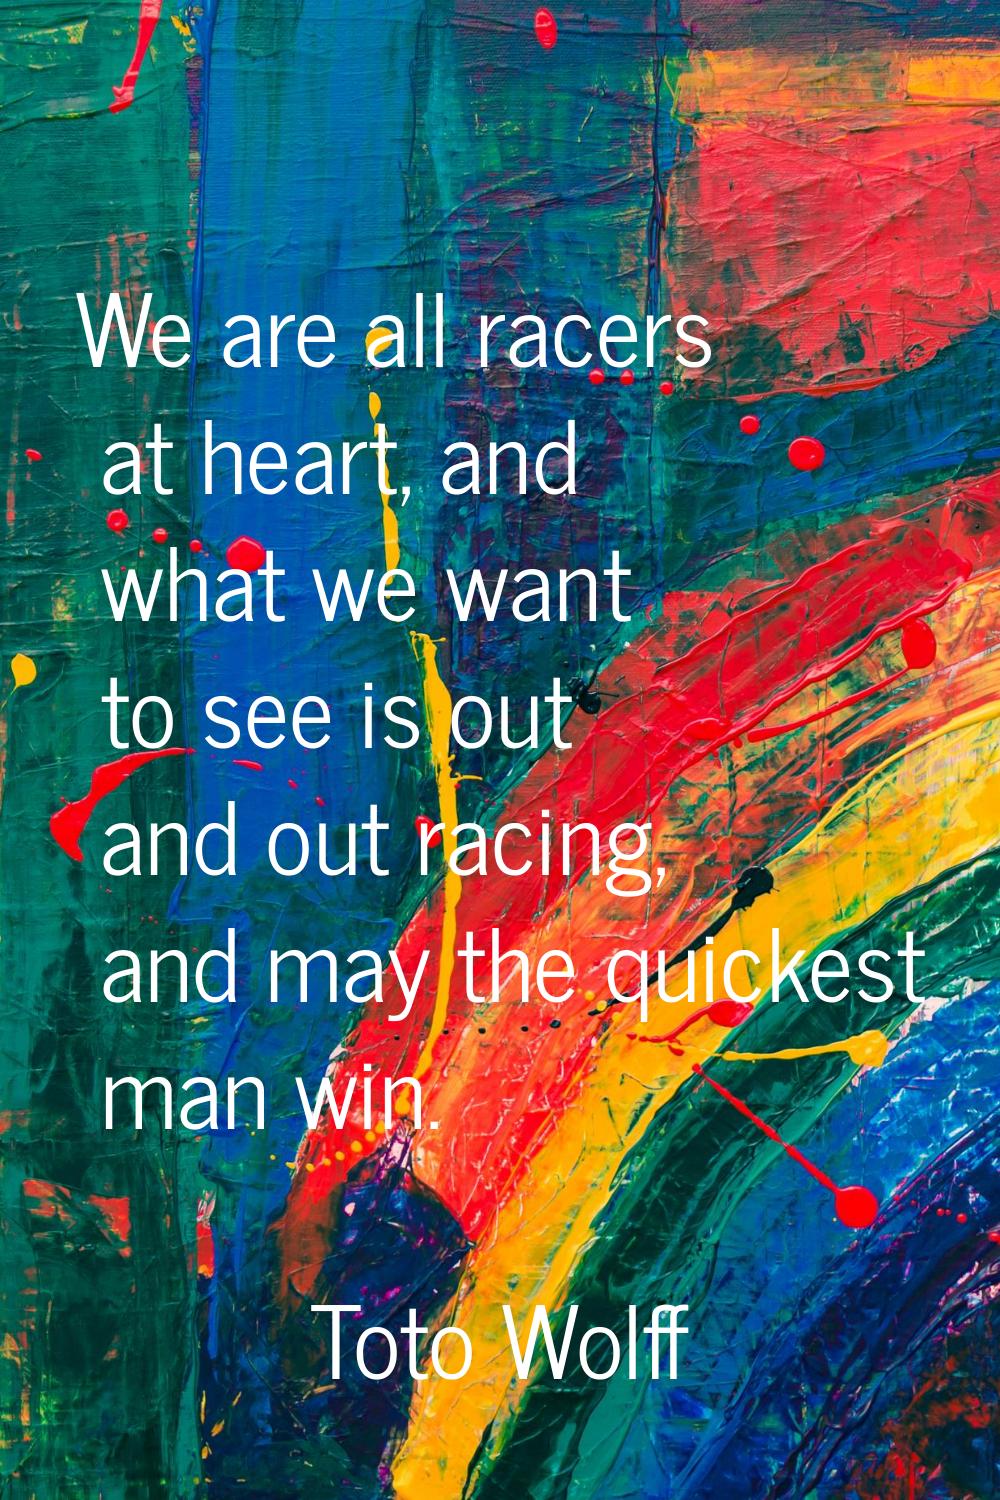 We are all racers at heart, and what we want to see is out and out racing, and may the quickest man